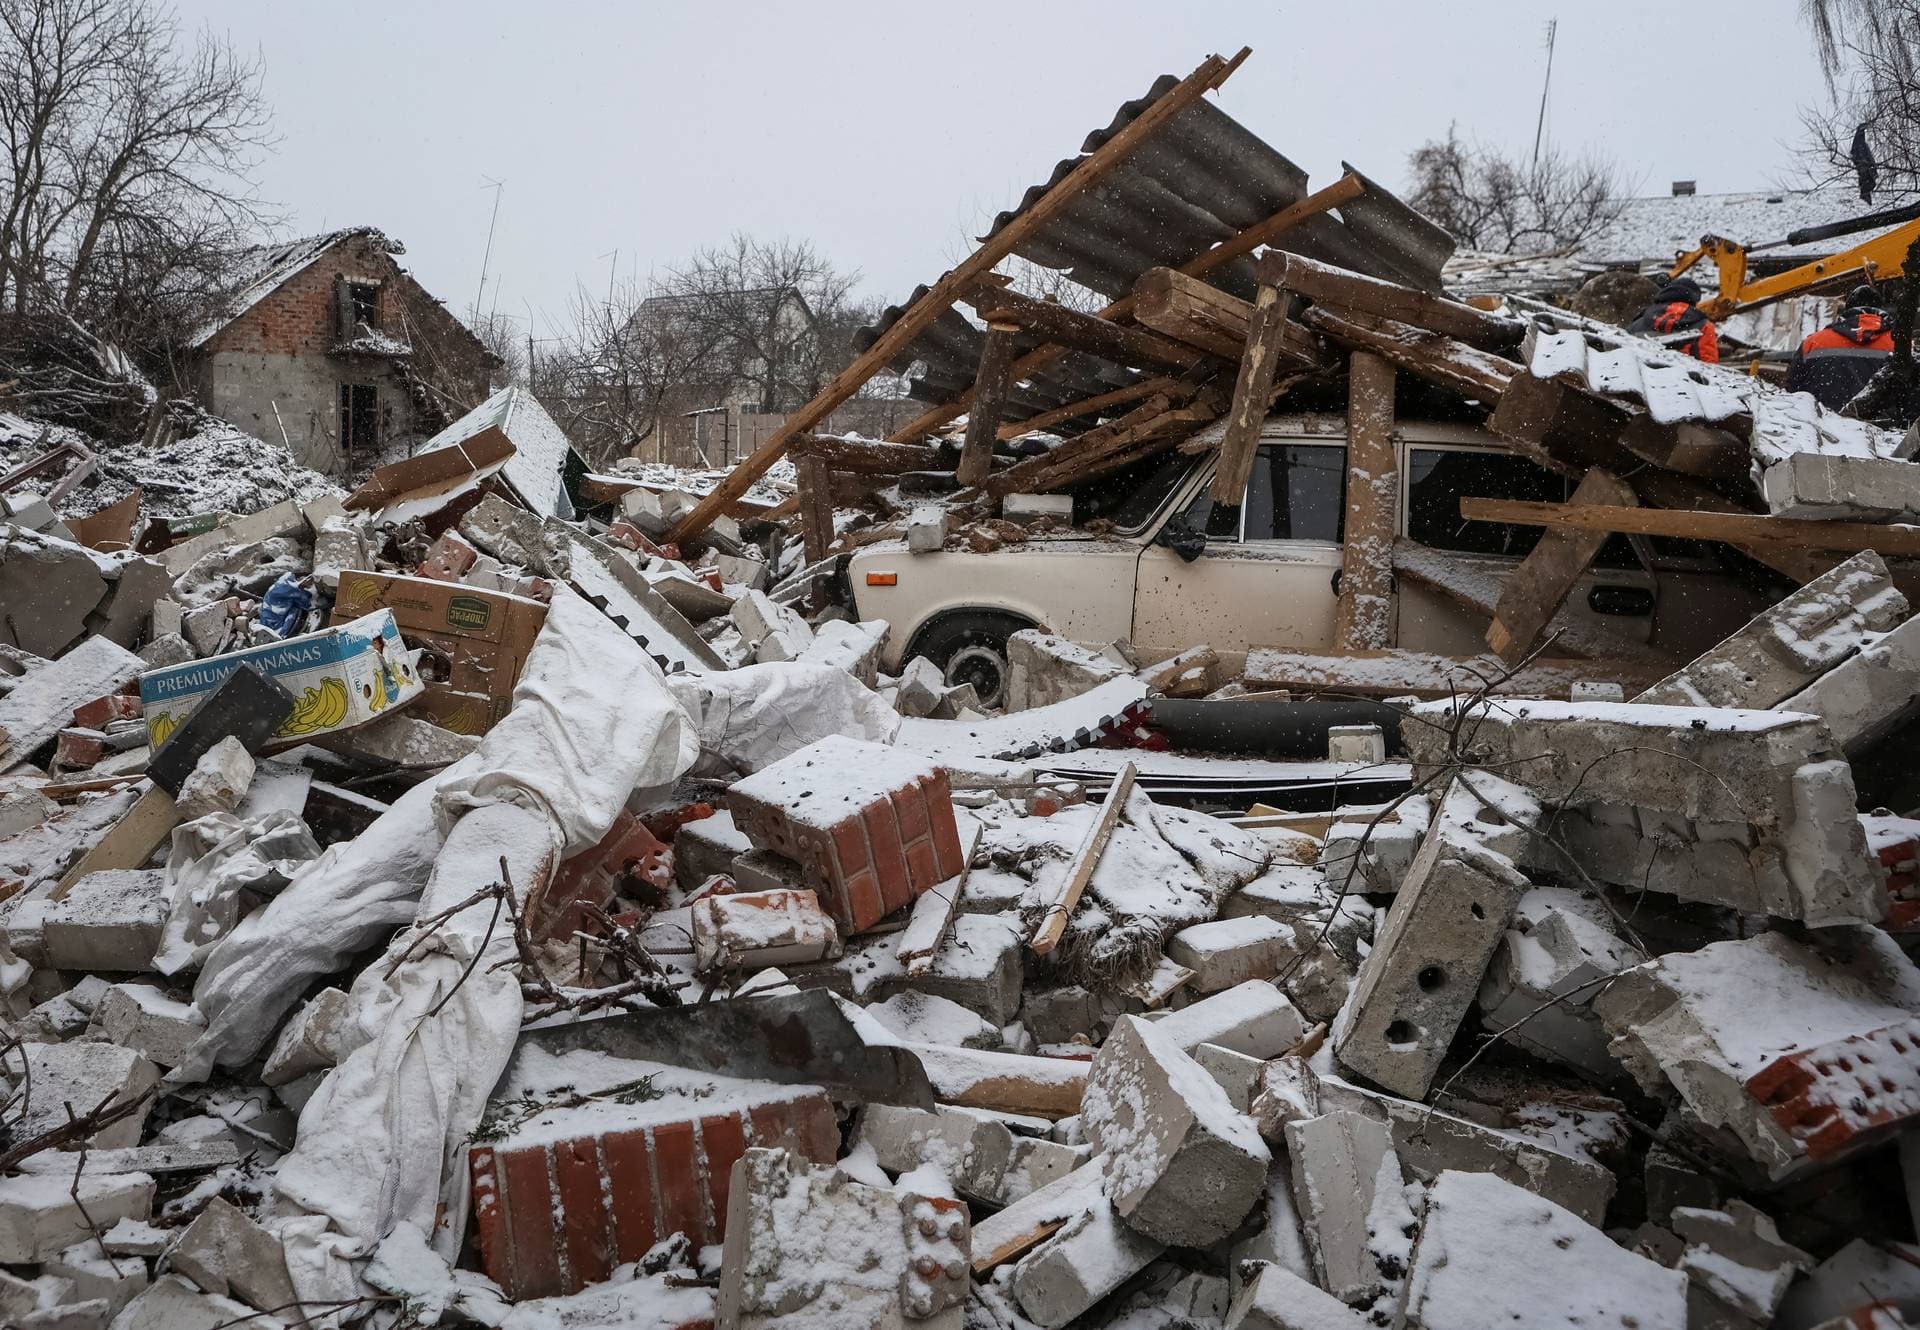 A view shows a house destroyed in a Russian missile strike in the town of Zmiiv